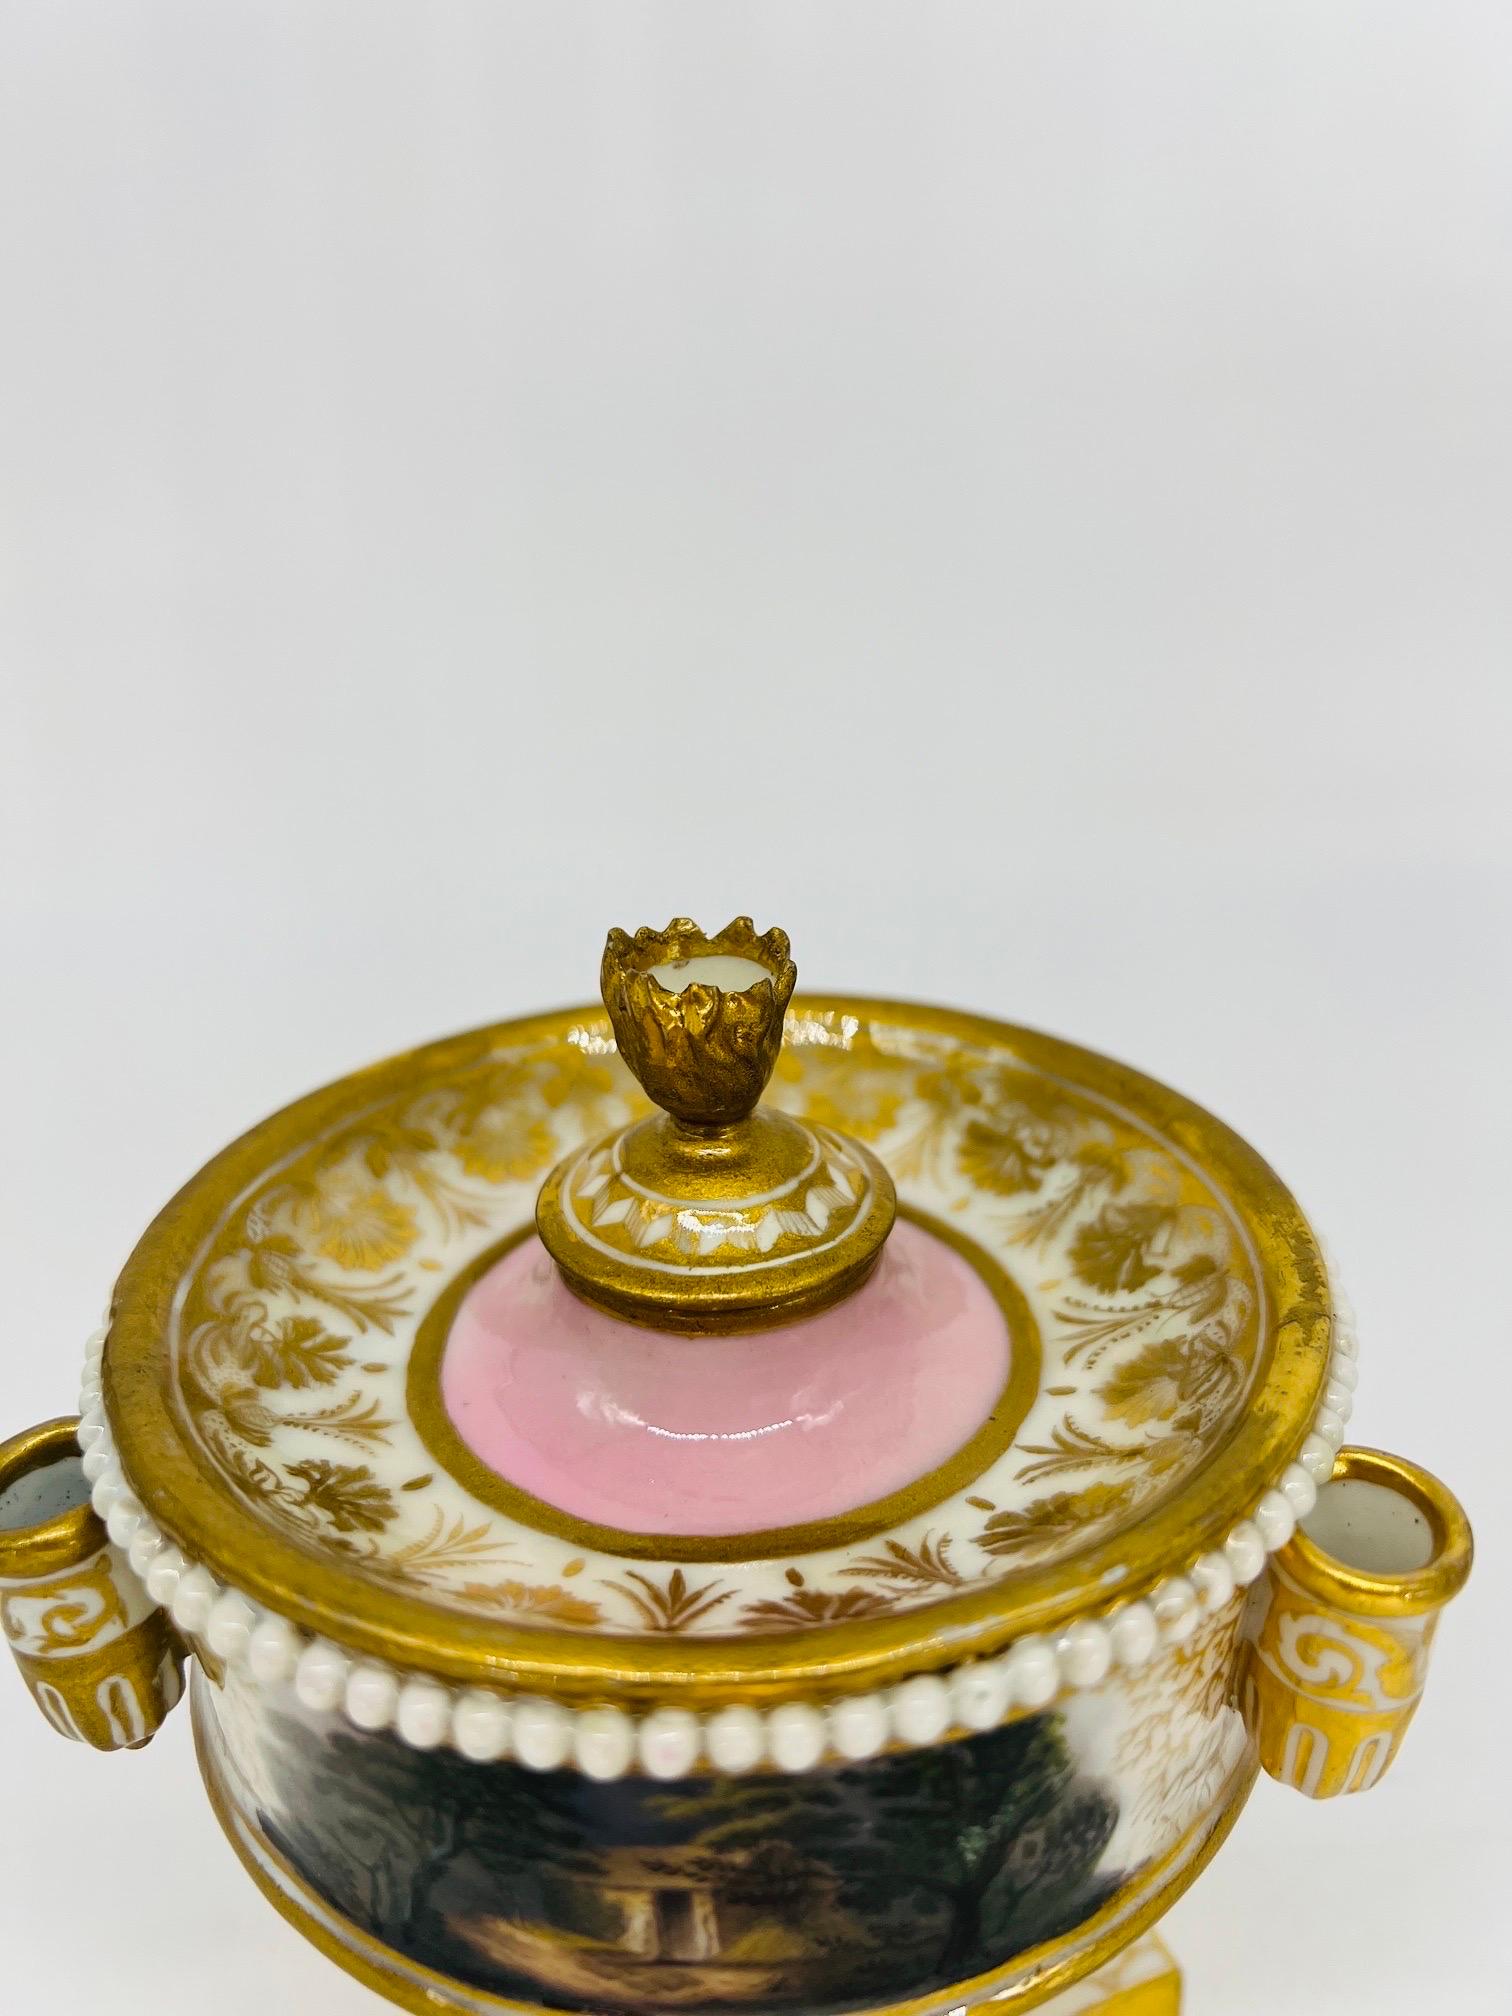 Early 19th Century Flight Barr & Barr Porcelain Inkwell, Homage to Robert Burns, circa 1810 For Sale